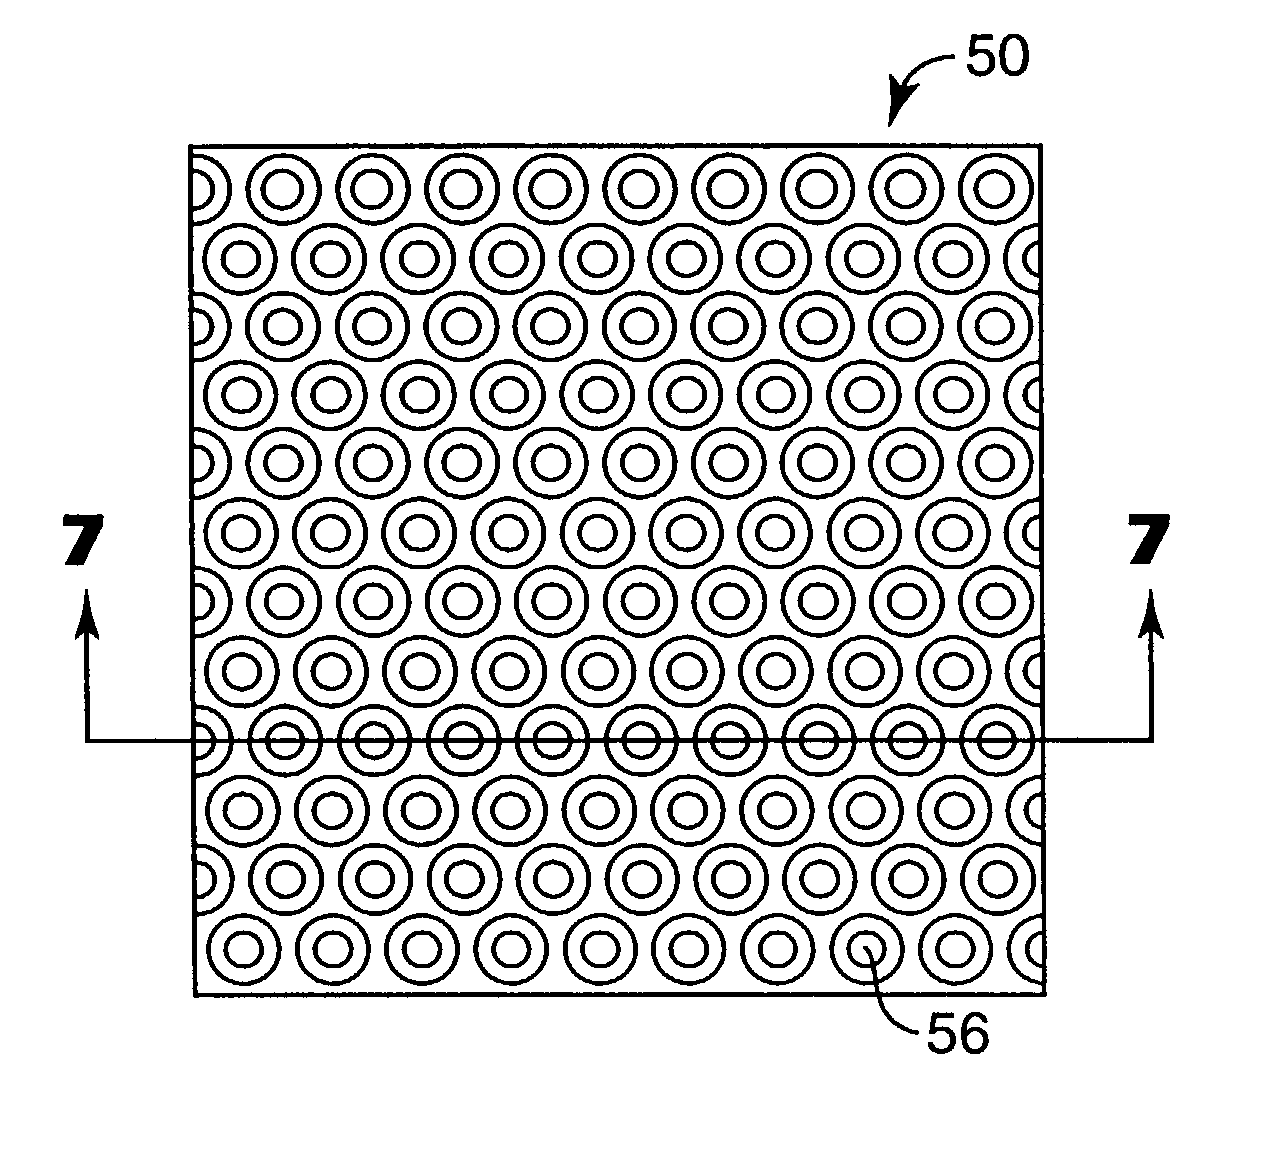 Abrasive product, method of making and using the same, and apparatus for making the same